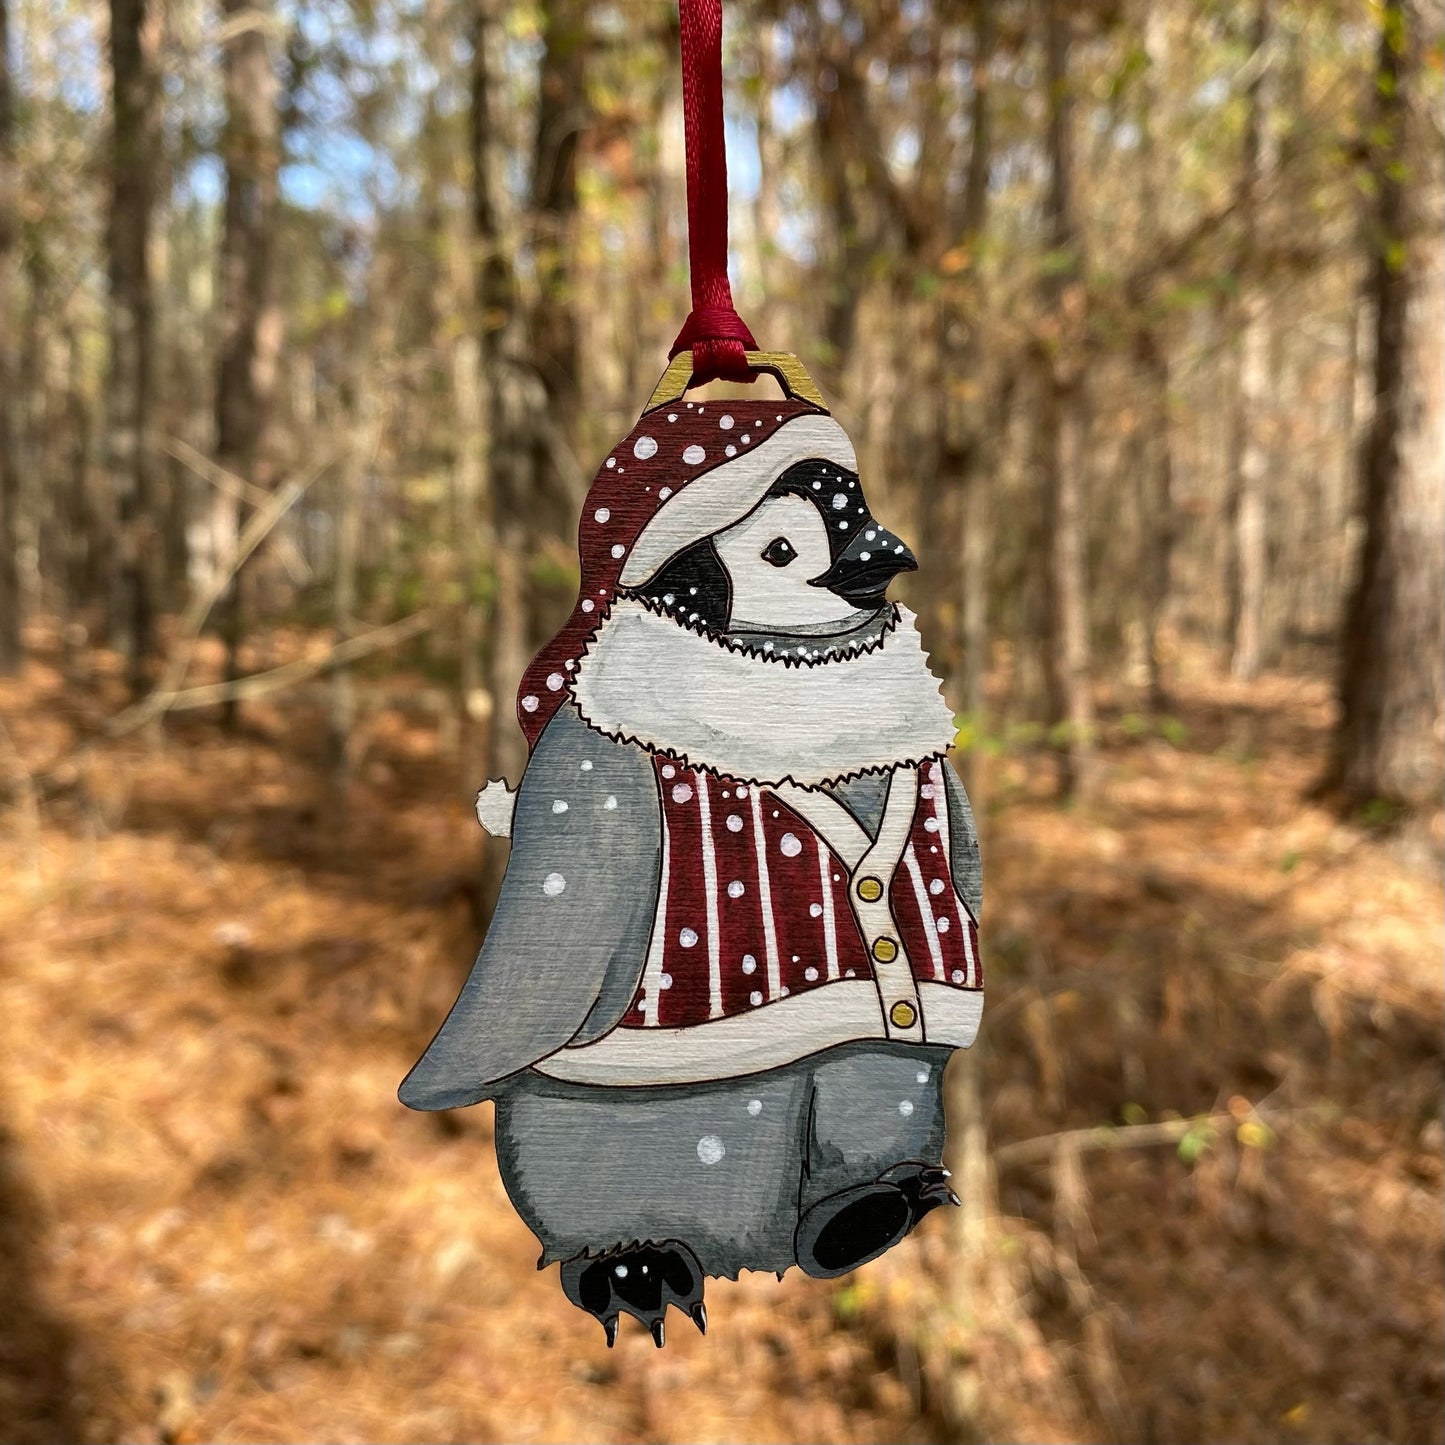 Gertrude the Penguin Hand-Painted Ornament